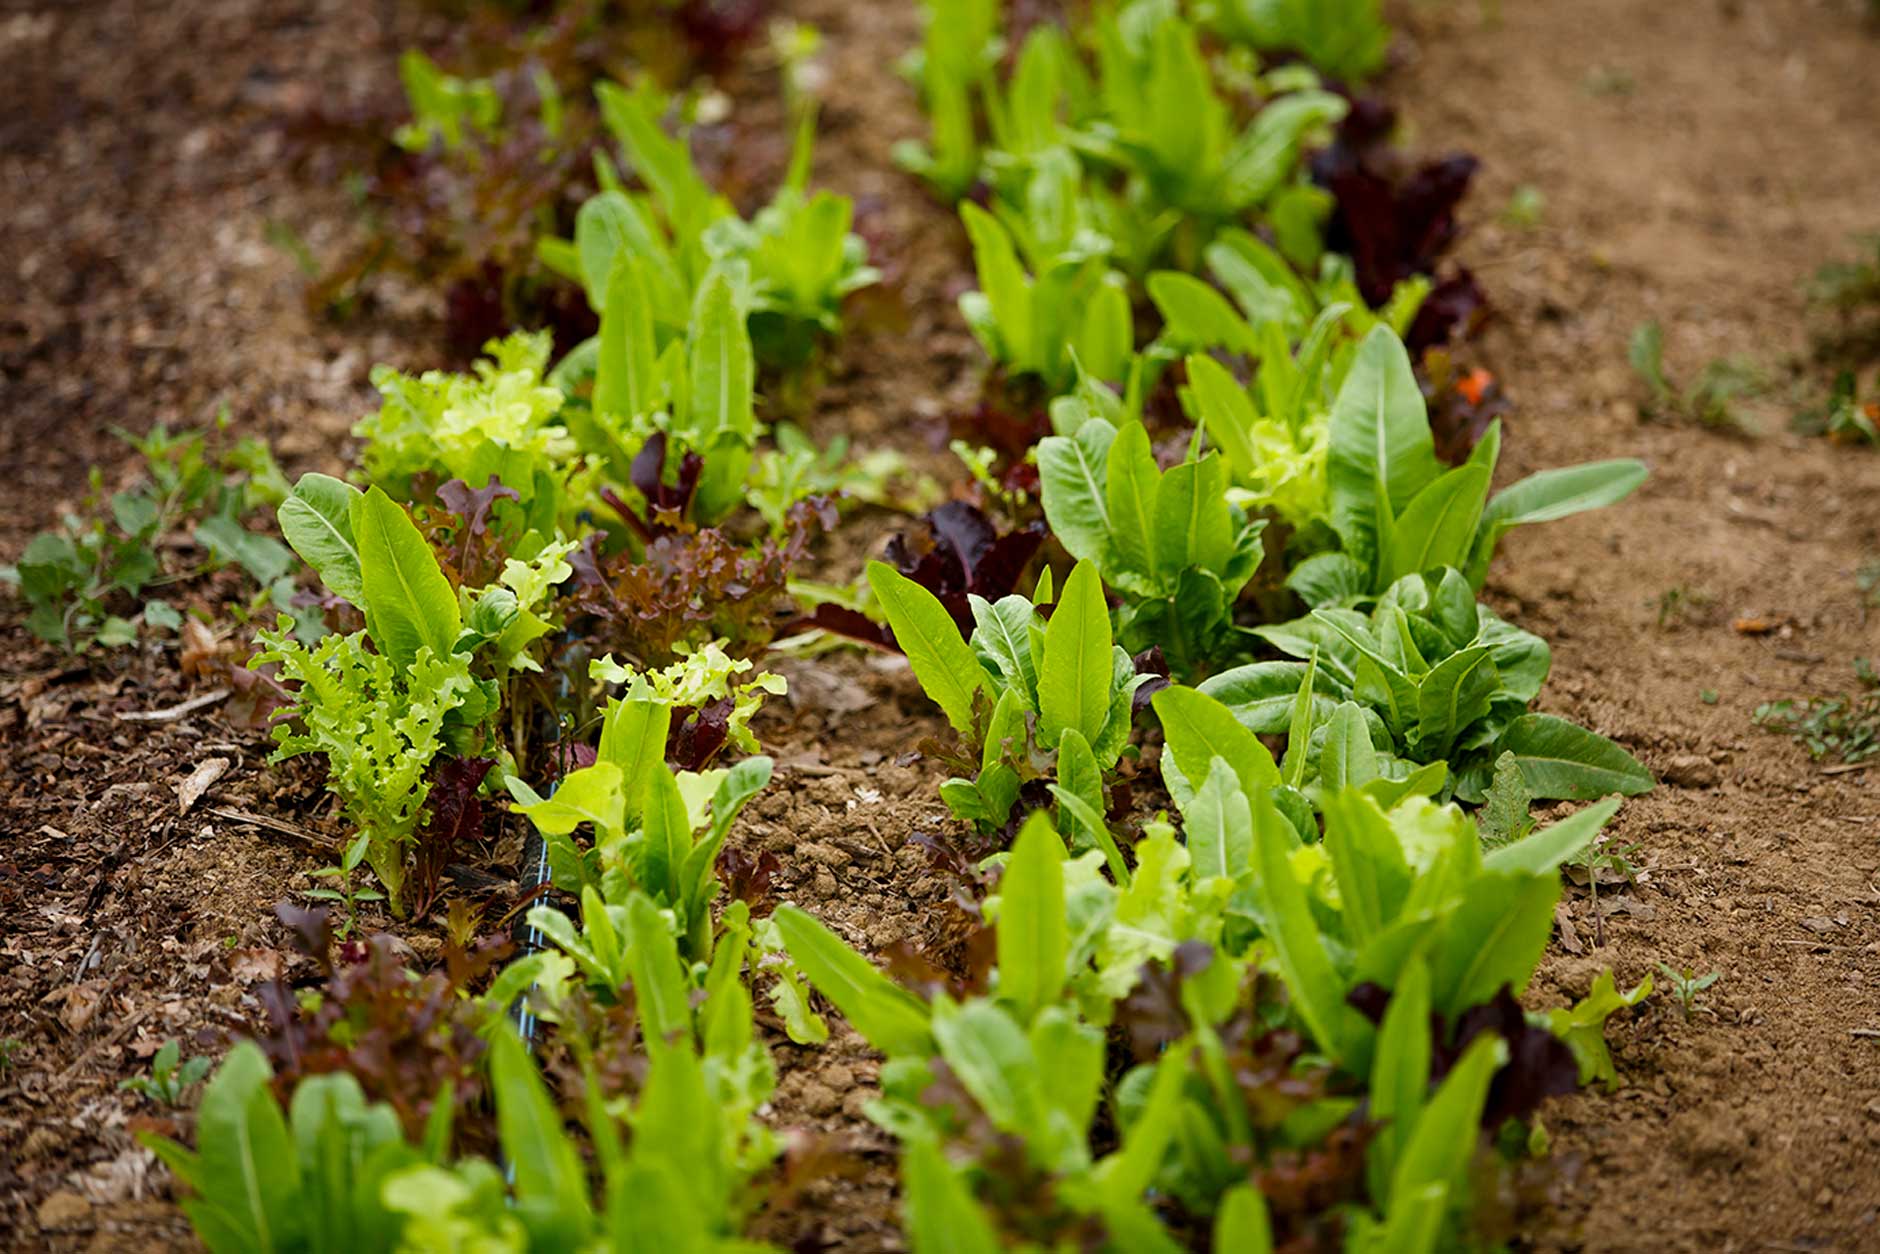 Lettuce grows at the Indiana University Campus Farm on Friday, Sept. 7, 2018. (James Brosher/IU Communications)